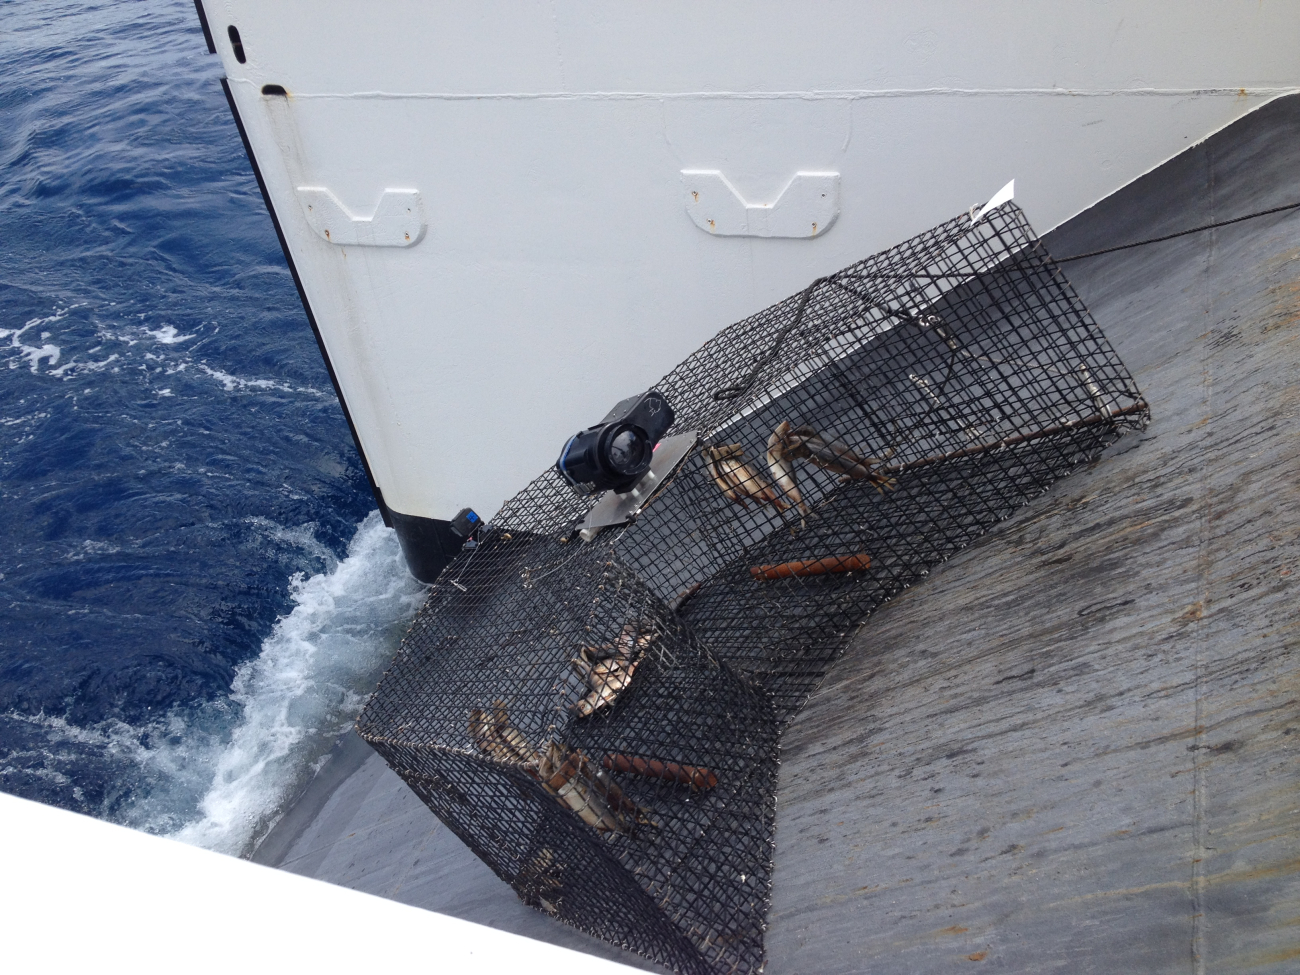 Baited chevron fish trap going down the stern ramp and into the water